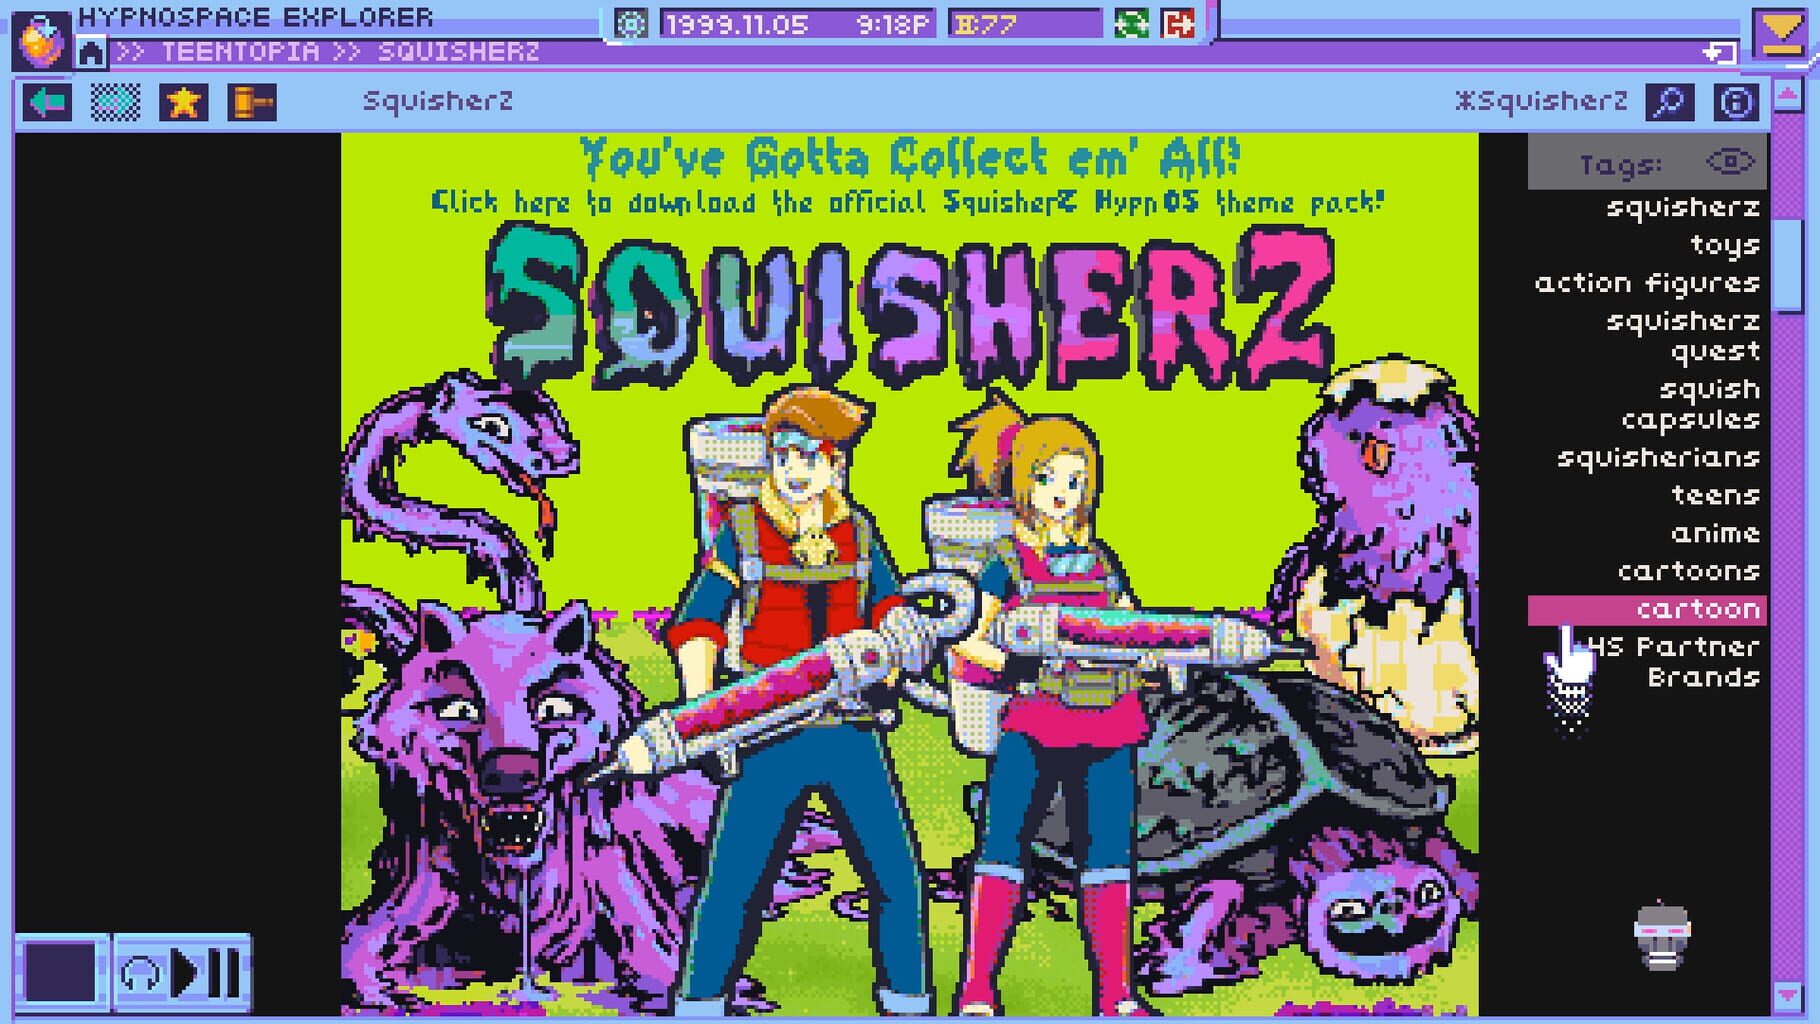 Screenshot for Hypnospace Outlaw